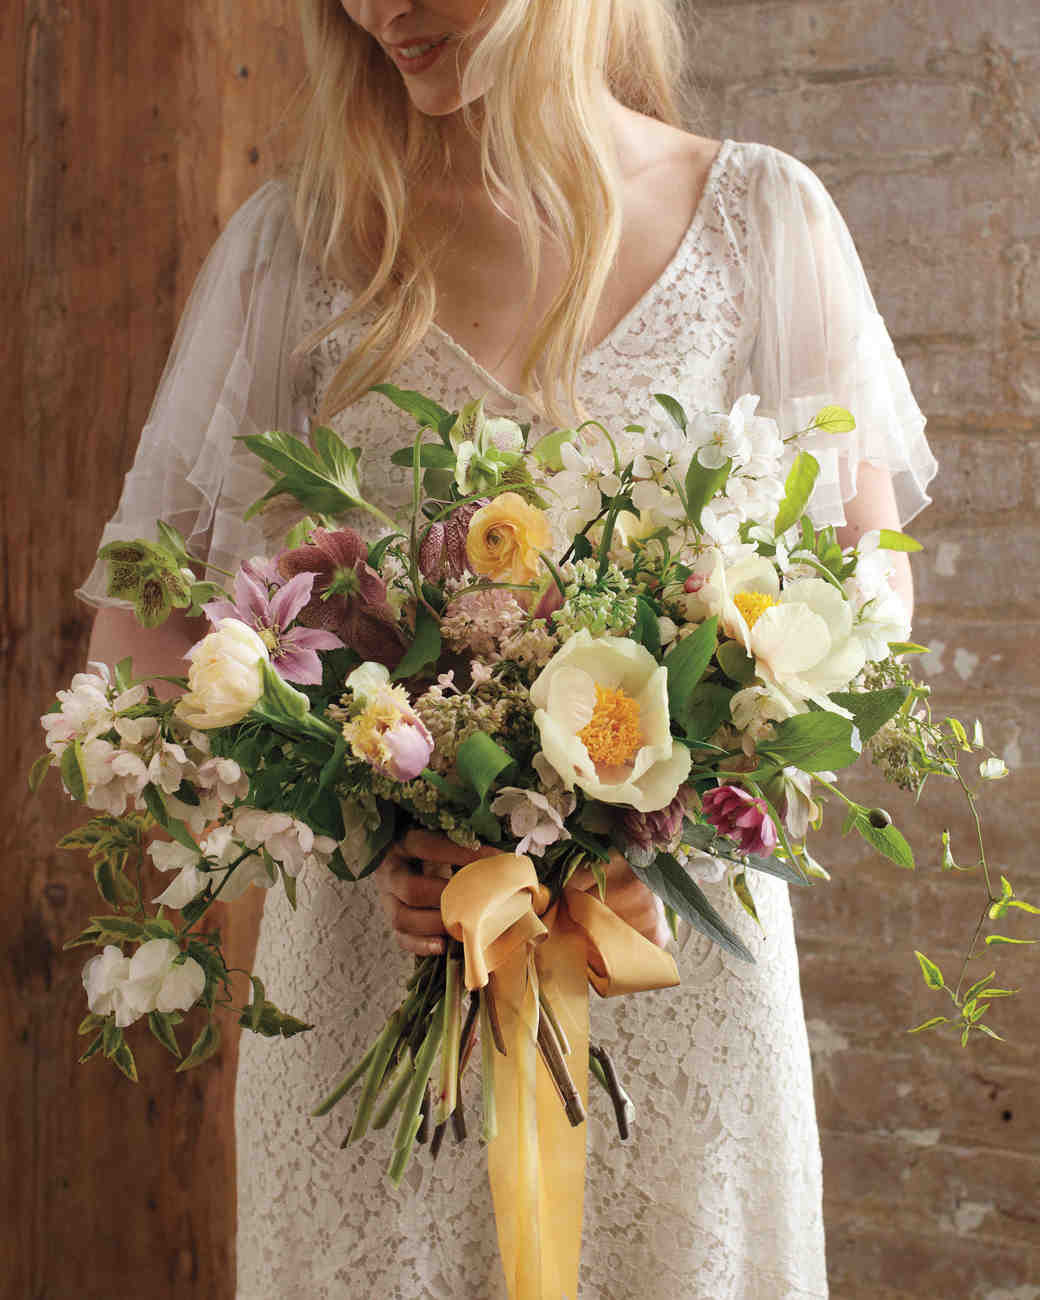 Spring Wedding Flowers
 Spring Wedding Flower Ideas from the Industry s Best